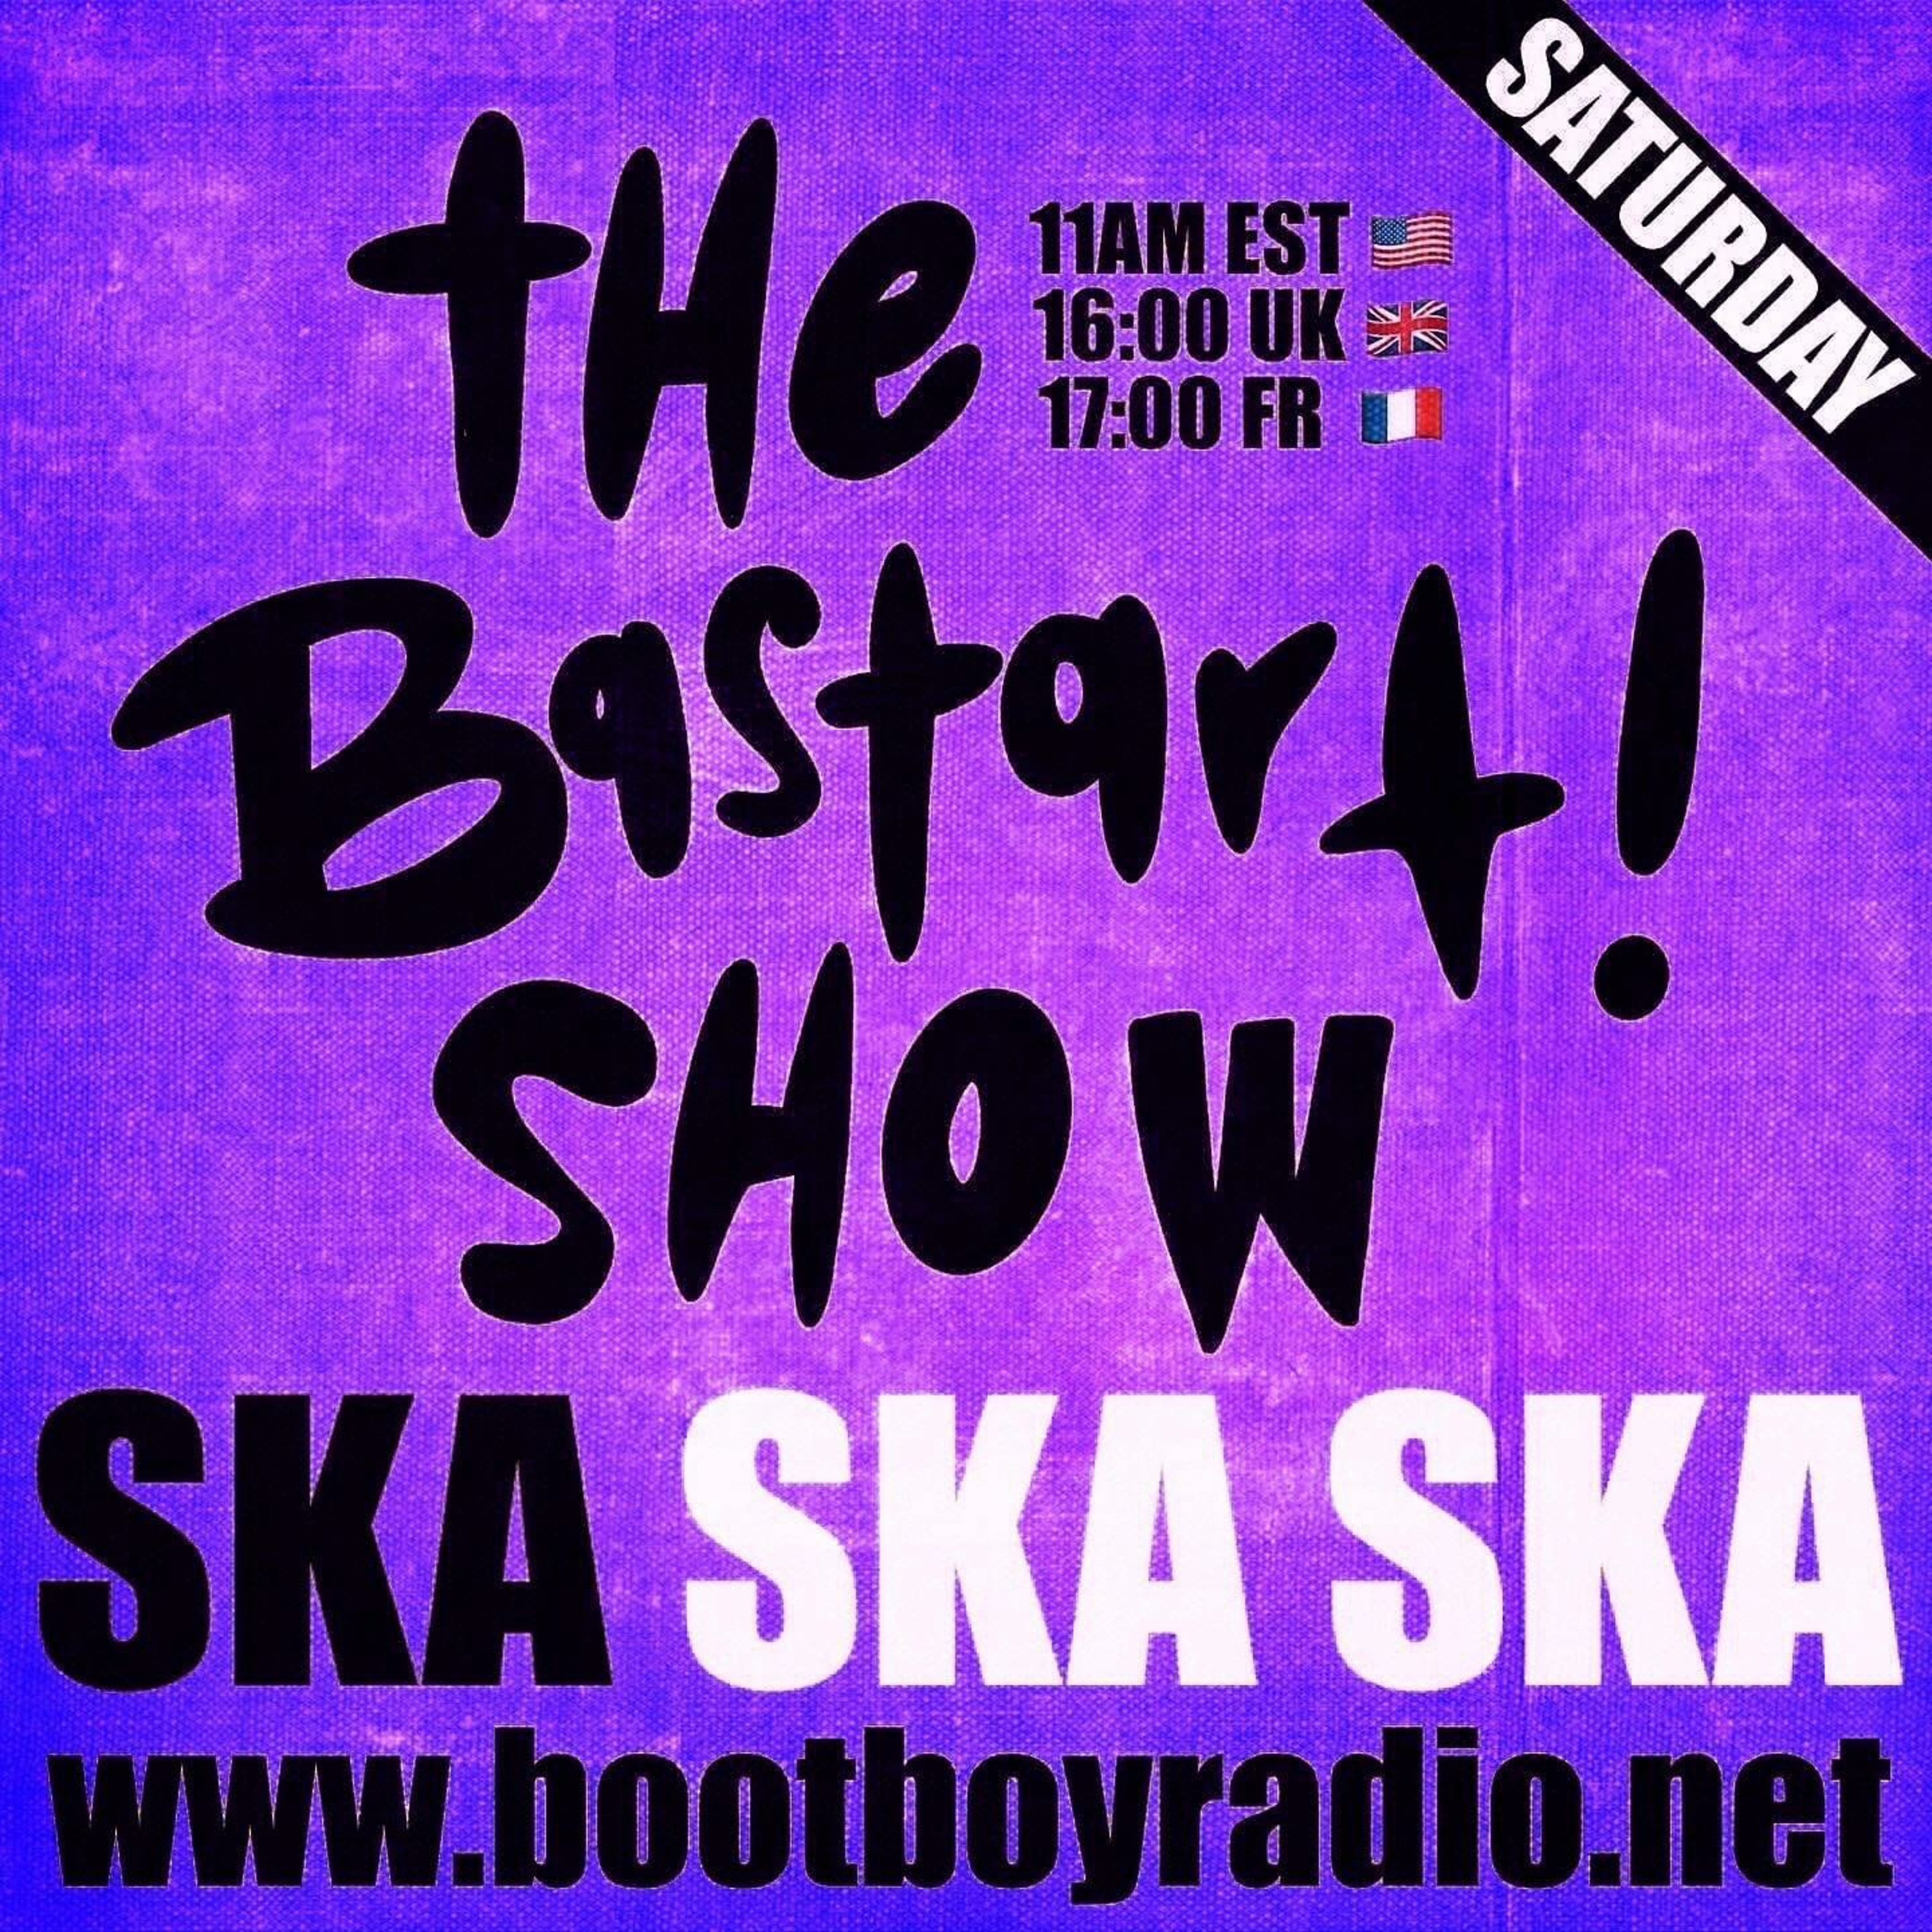 Episode 2120: The Bastart Show With Stella  14th May 2022  On www.bootboyradio.net